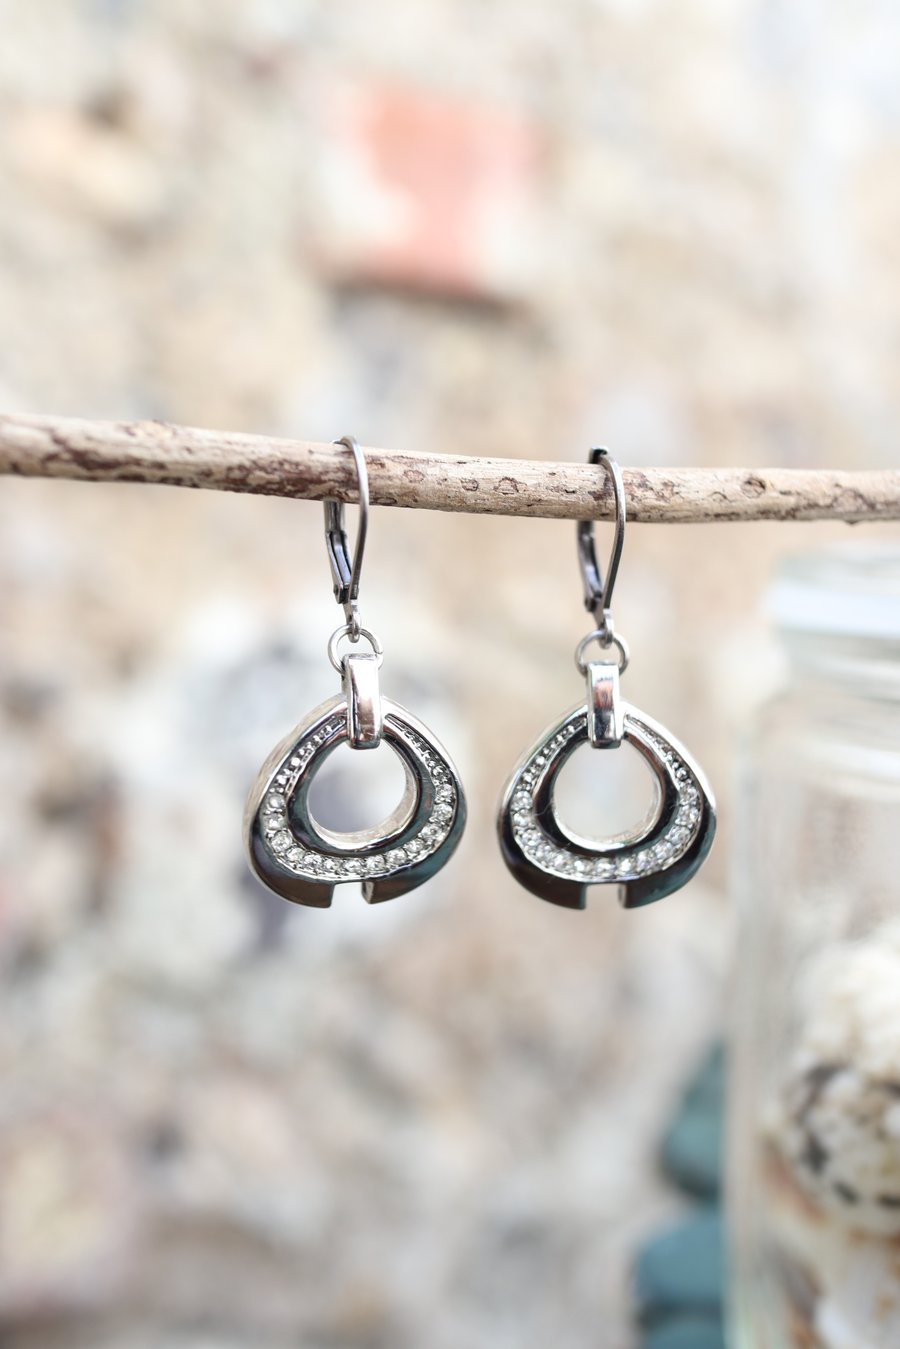 Up-cycled stainless steel decorated with faux diamond earrings